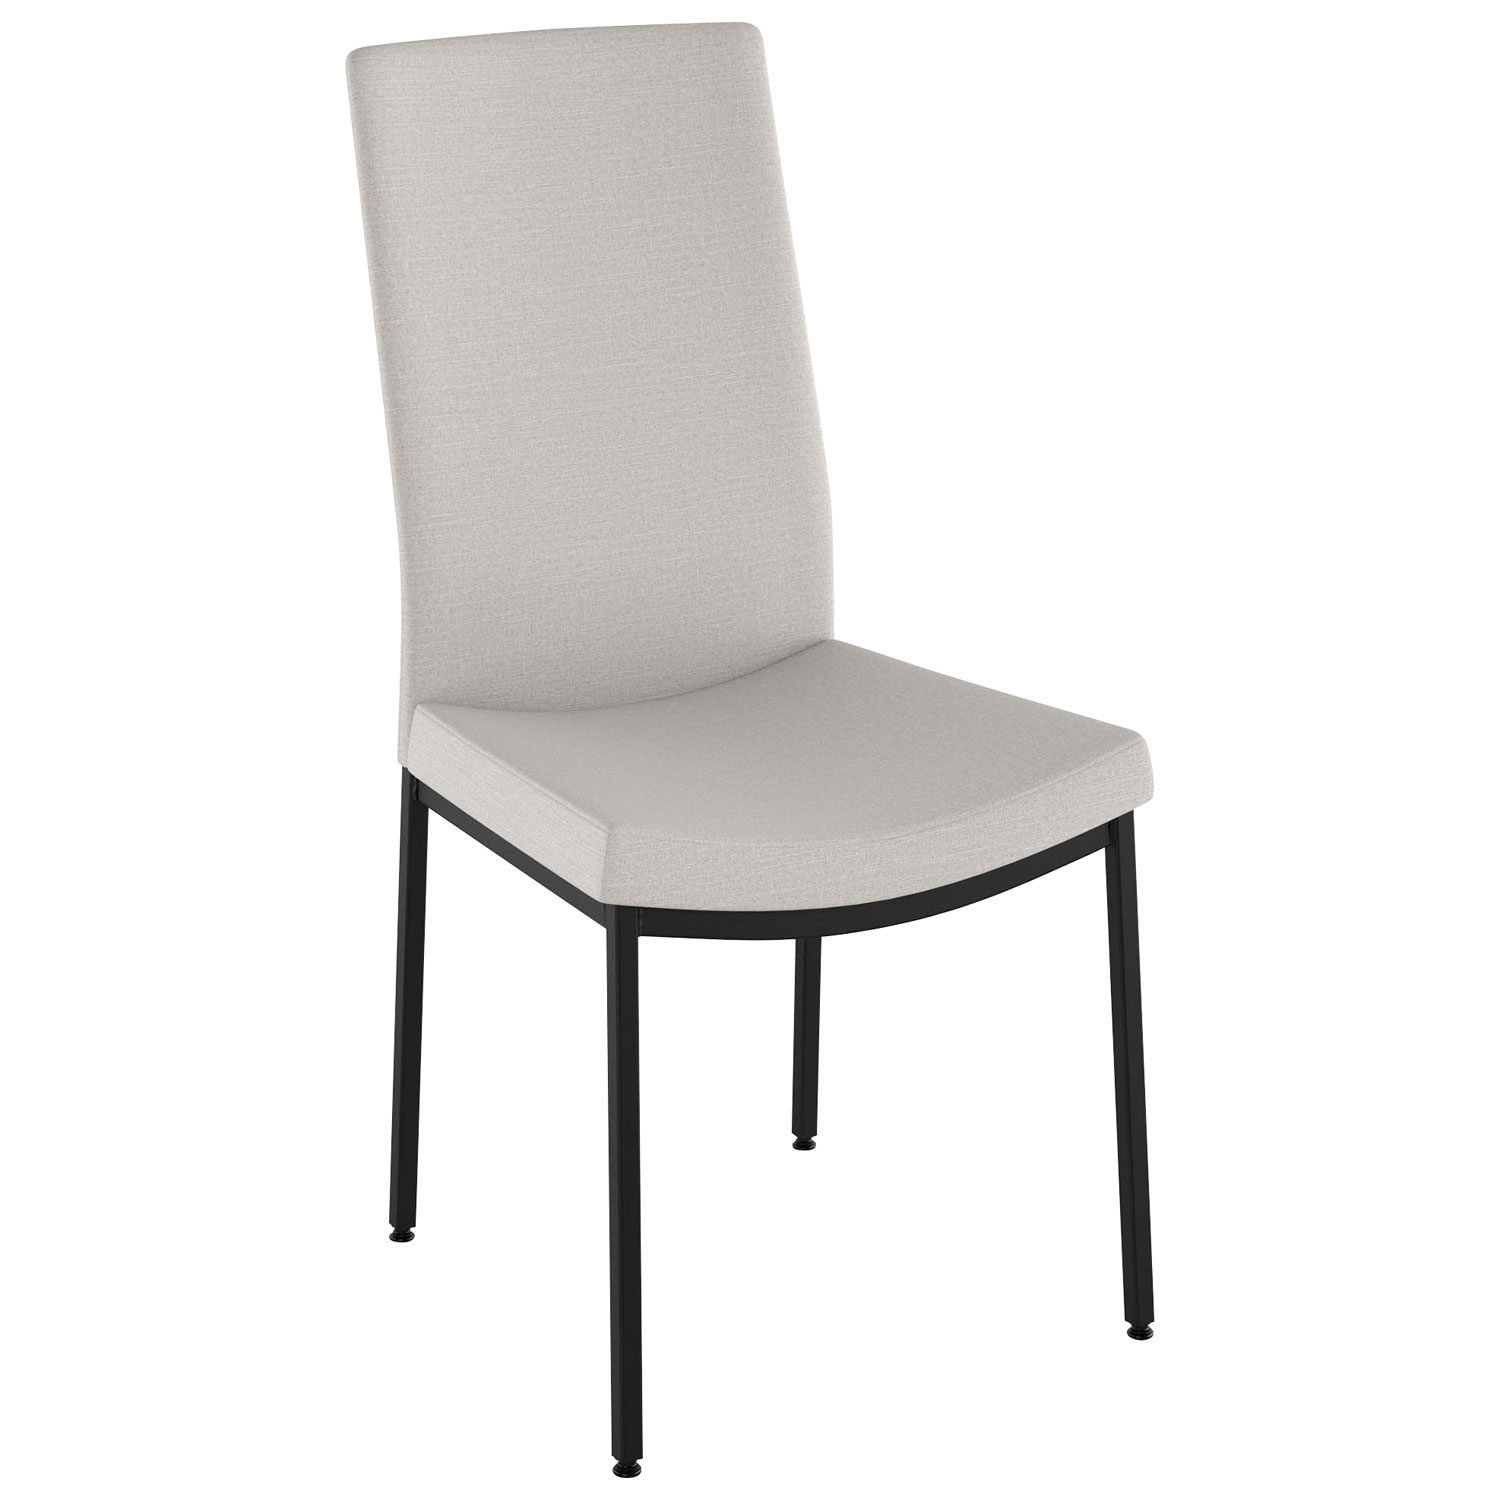 Torres Contemporary Polyester Dining Chair - Light Grey Woven/Black